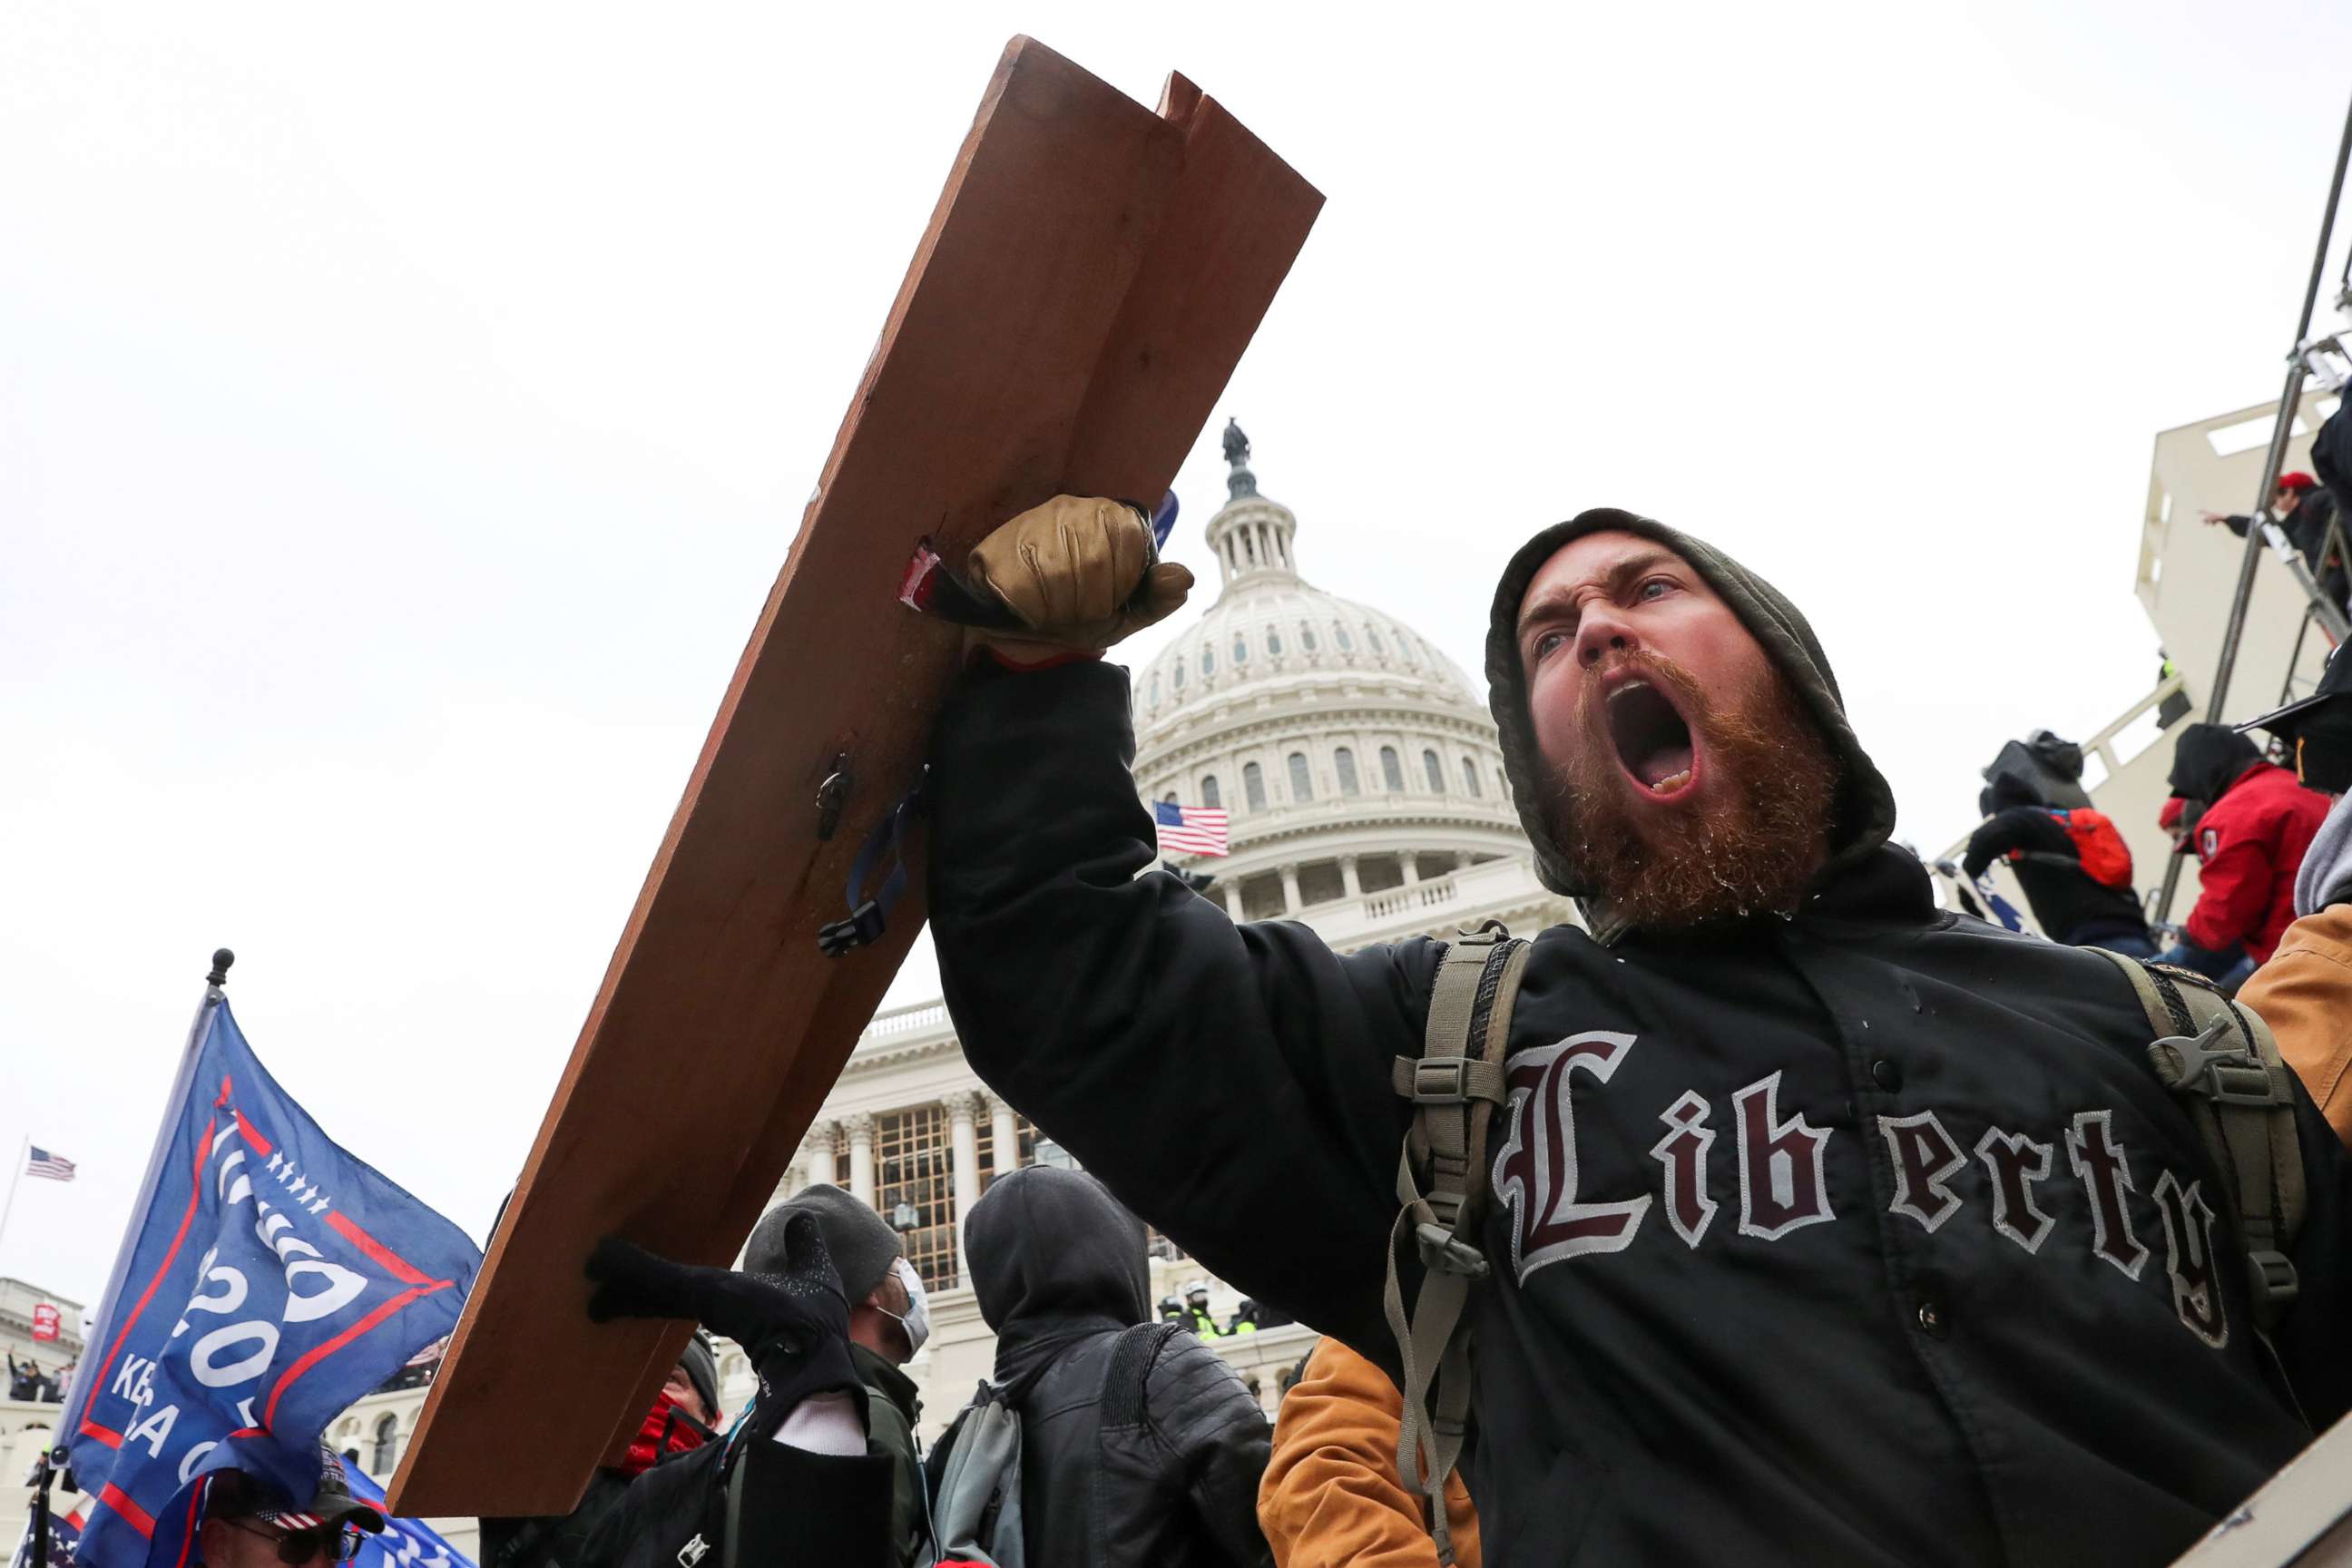 PHOTO: A man shouts as supporters of President Donald Trump gather in front of the U.S. Capitol Building in Washington, Jan. 6, 2021.